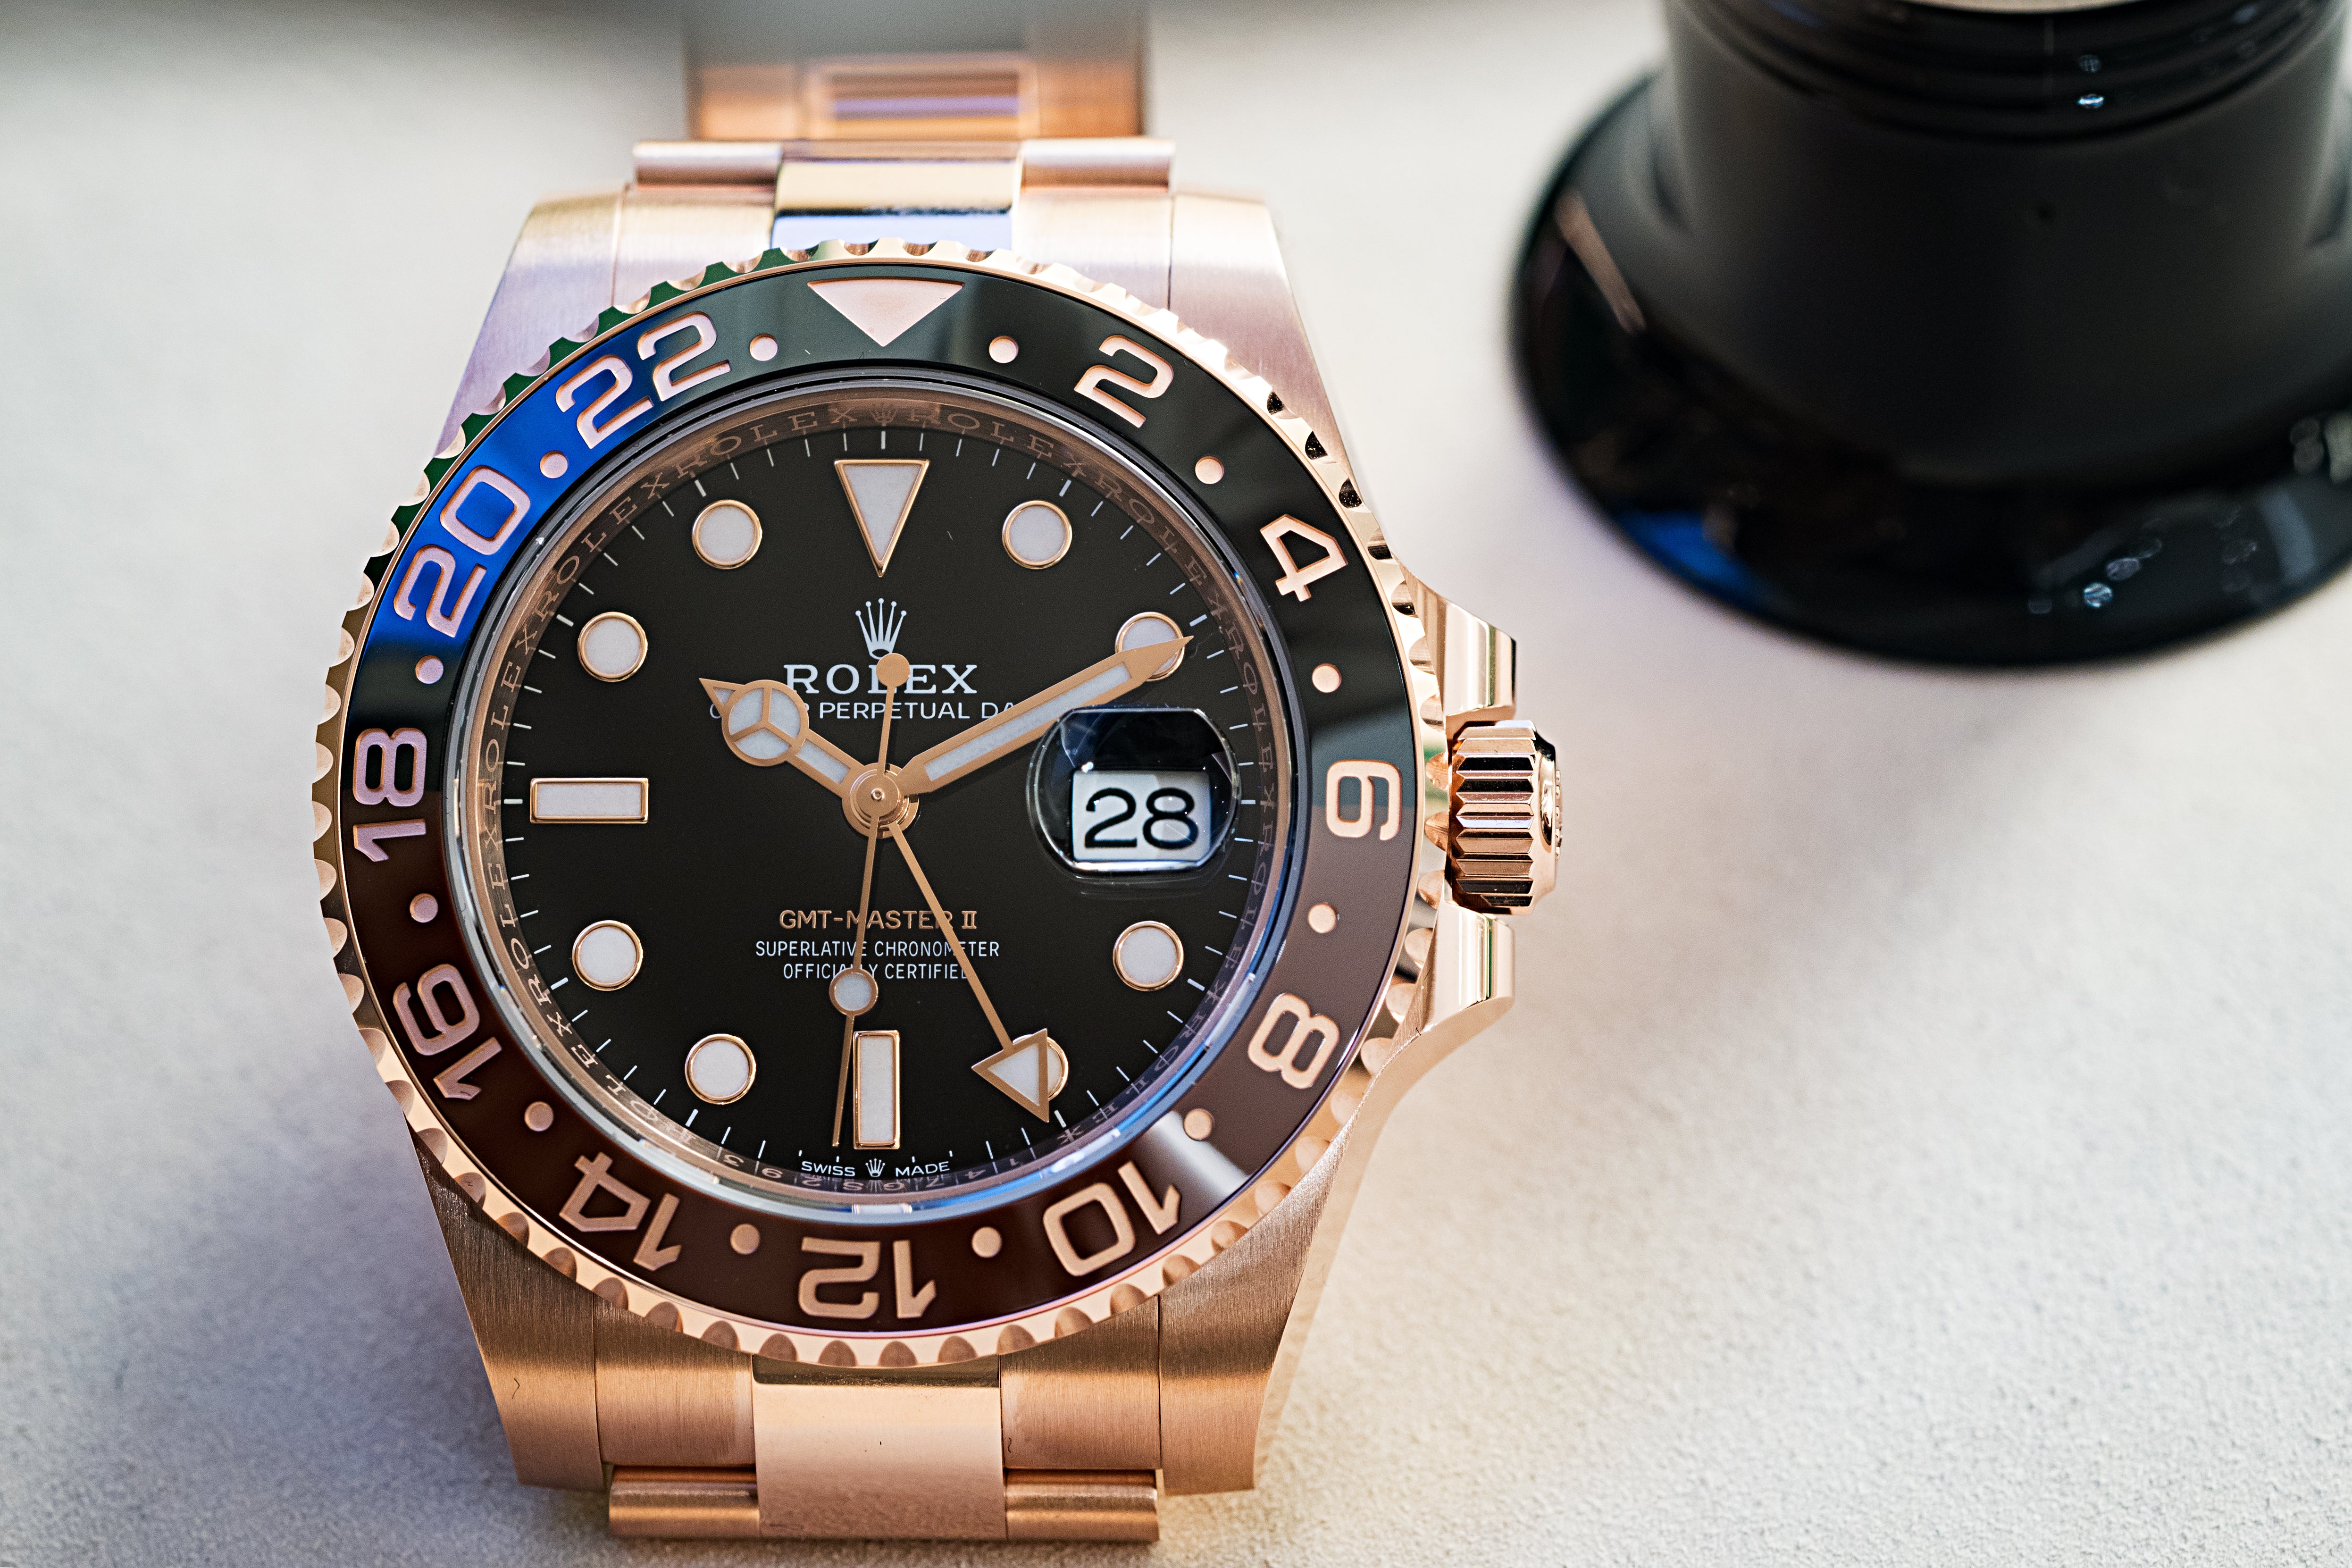 Rolex Nomenclature for All Things Rolex